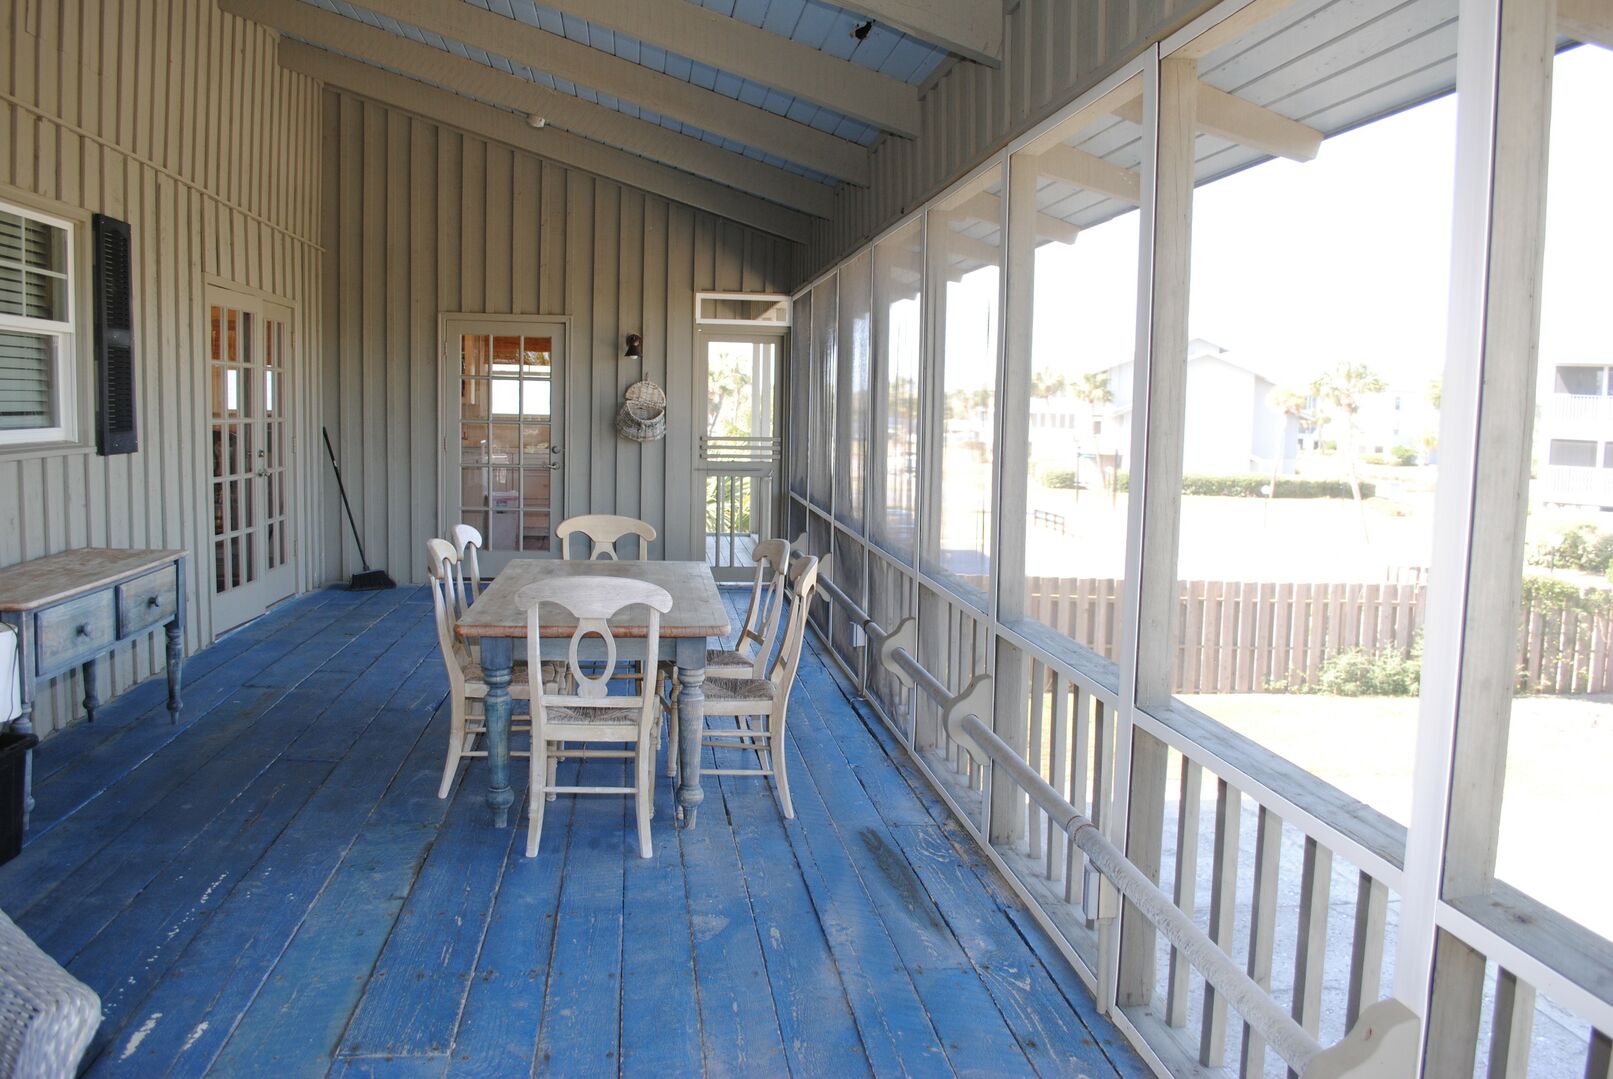 Screened Porch - Accessible from Dining Area/Kitchen